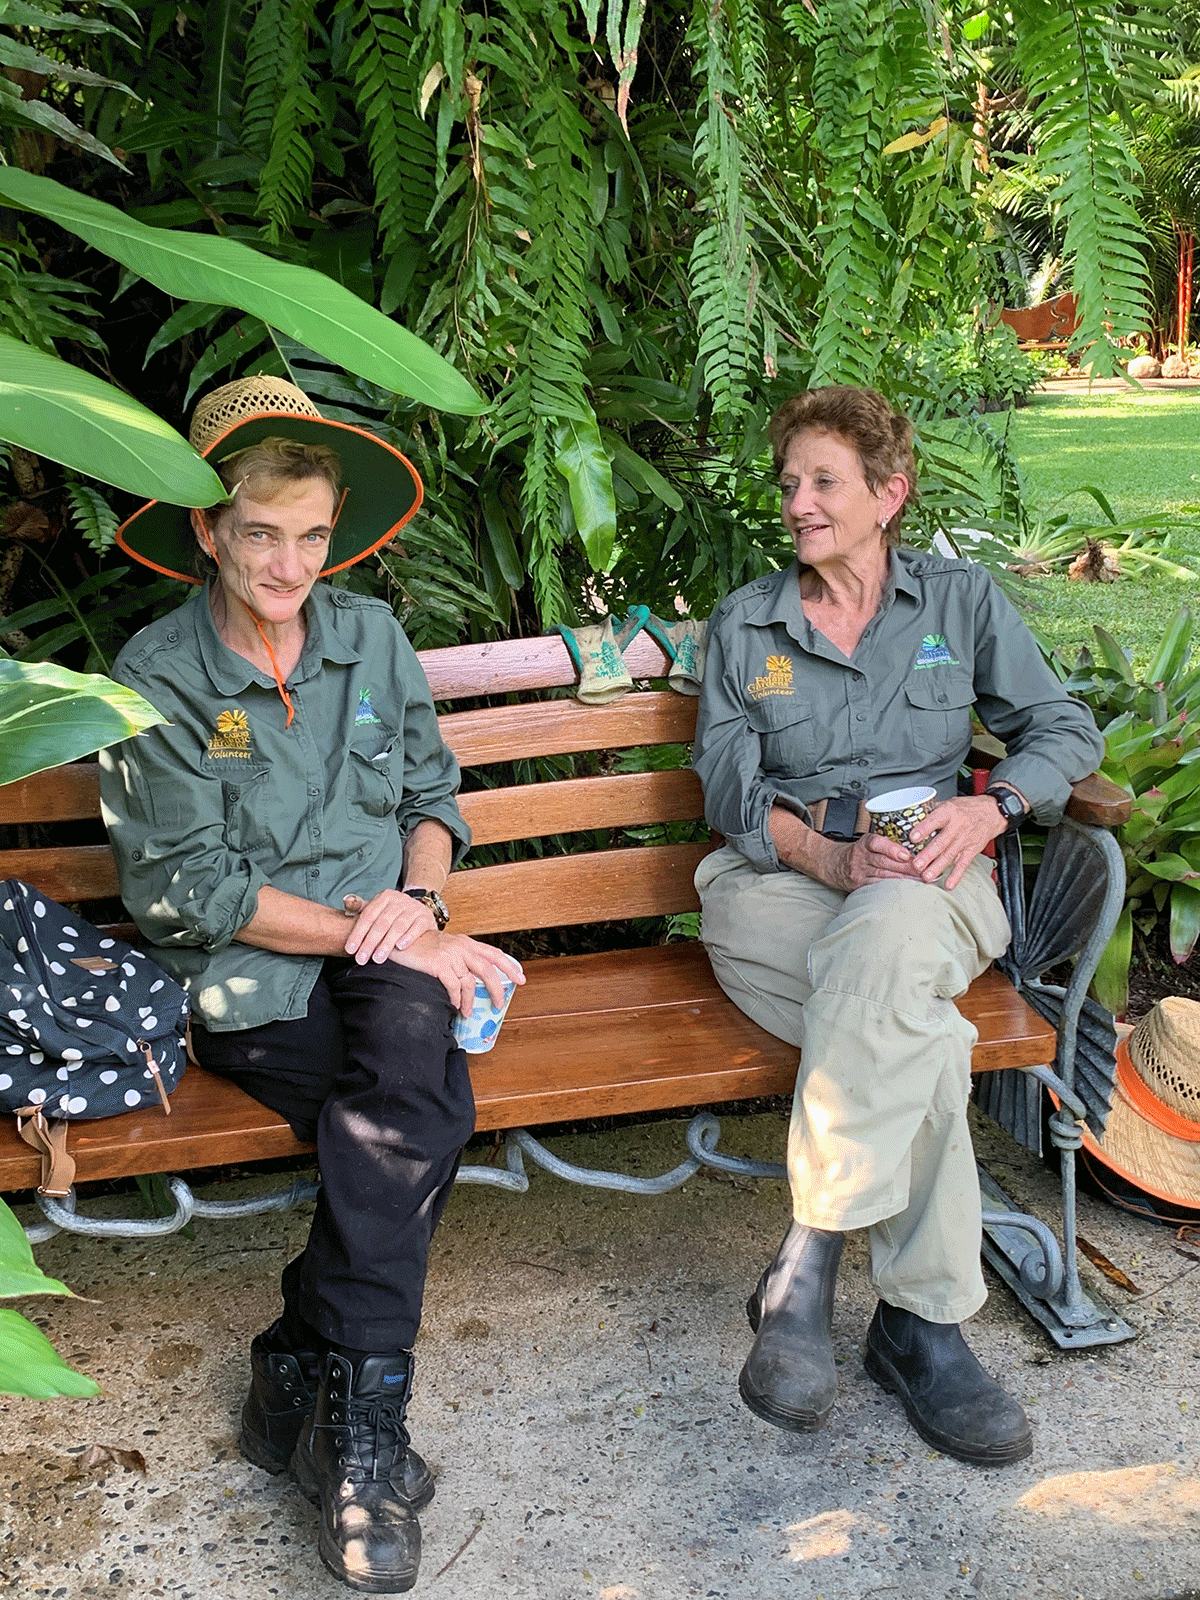 Volunteers take a break on one of the wrought iron feature benches in the Botanic Gardens